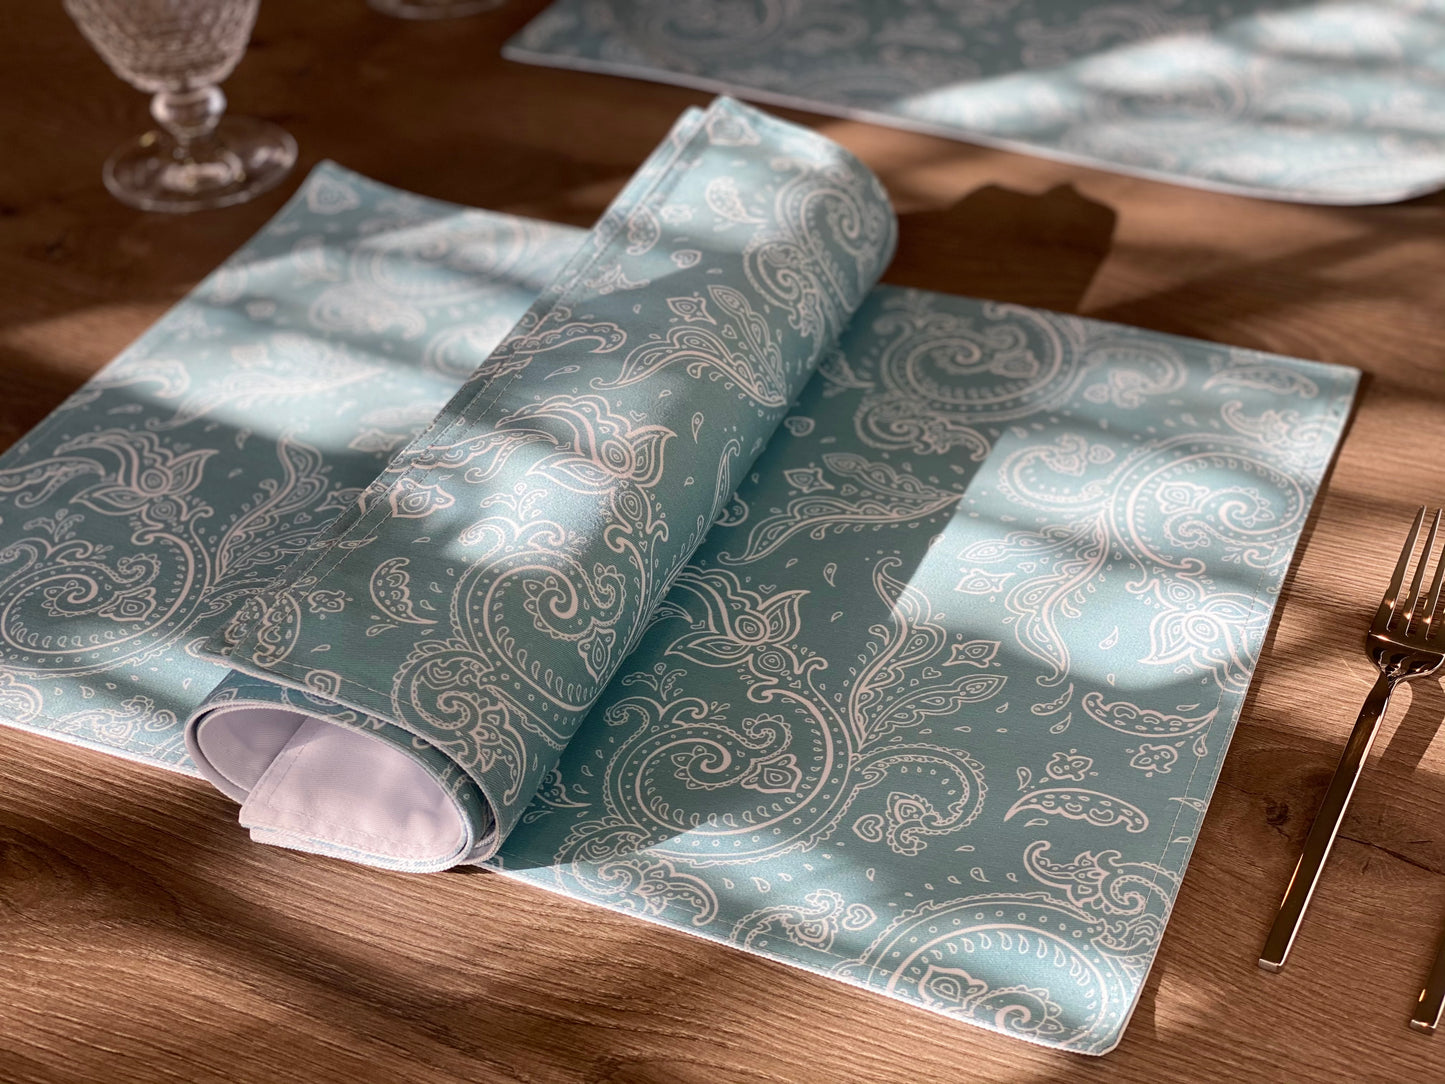 Set of 4 Blue Paisley Print Placemat, retro pattern fabric placemat, 14" x 19". Washable Cotton Placemat for fall dining table